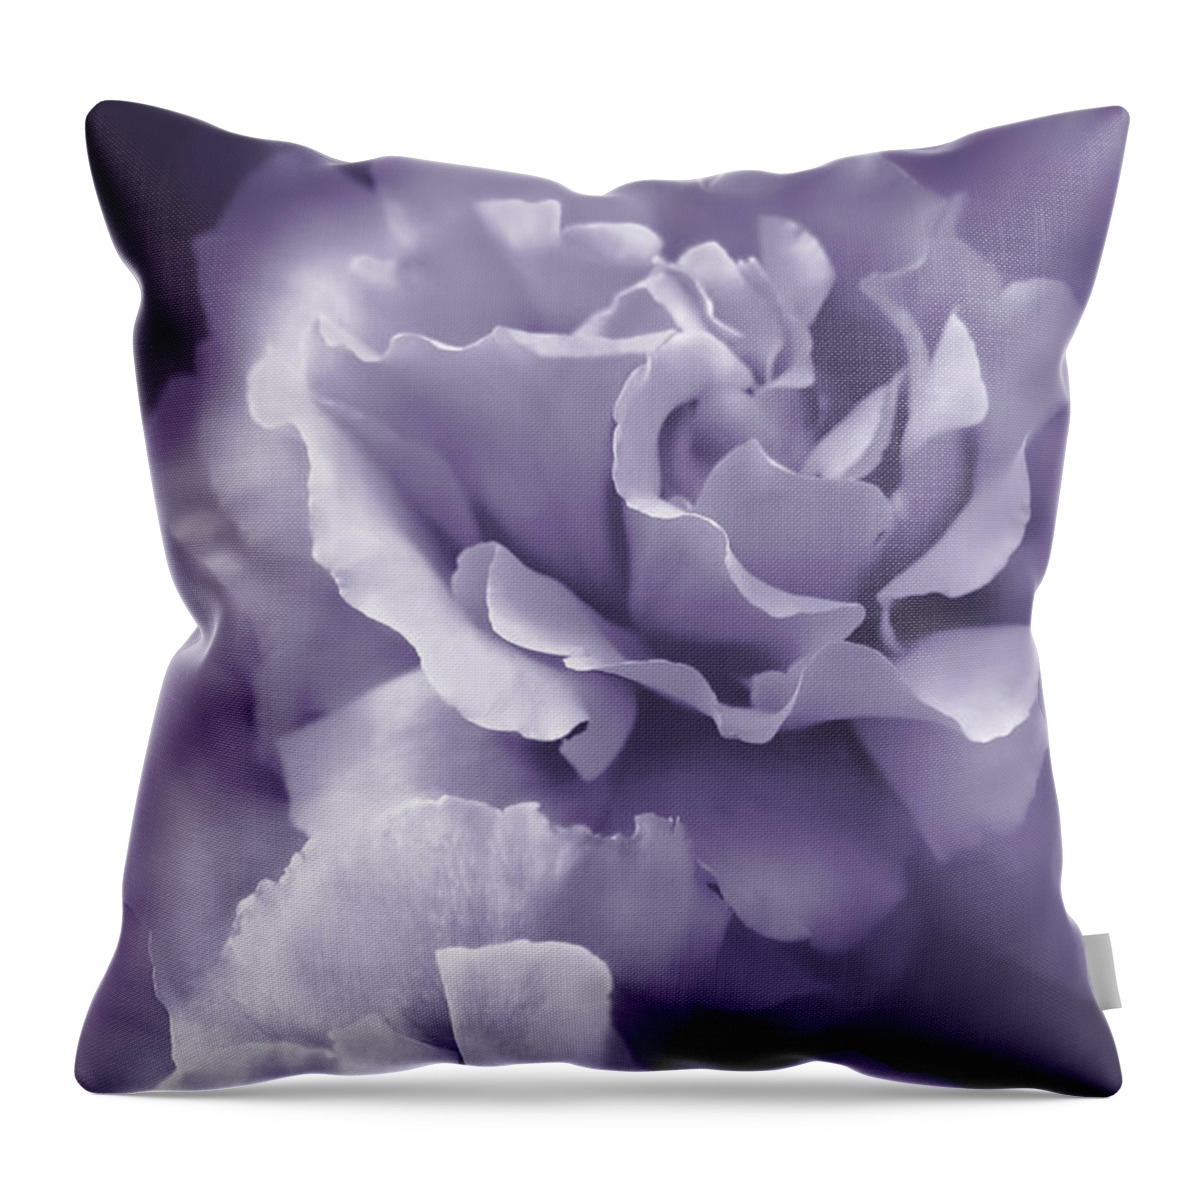 Rose Throw Pillow featuring the photograph Purple Lavender Roses by Jennie Marie Schell